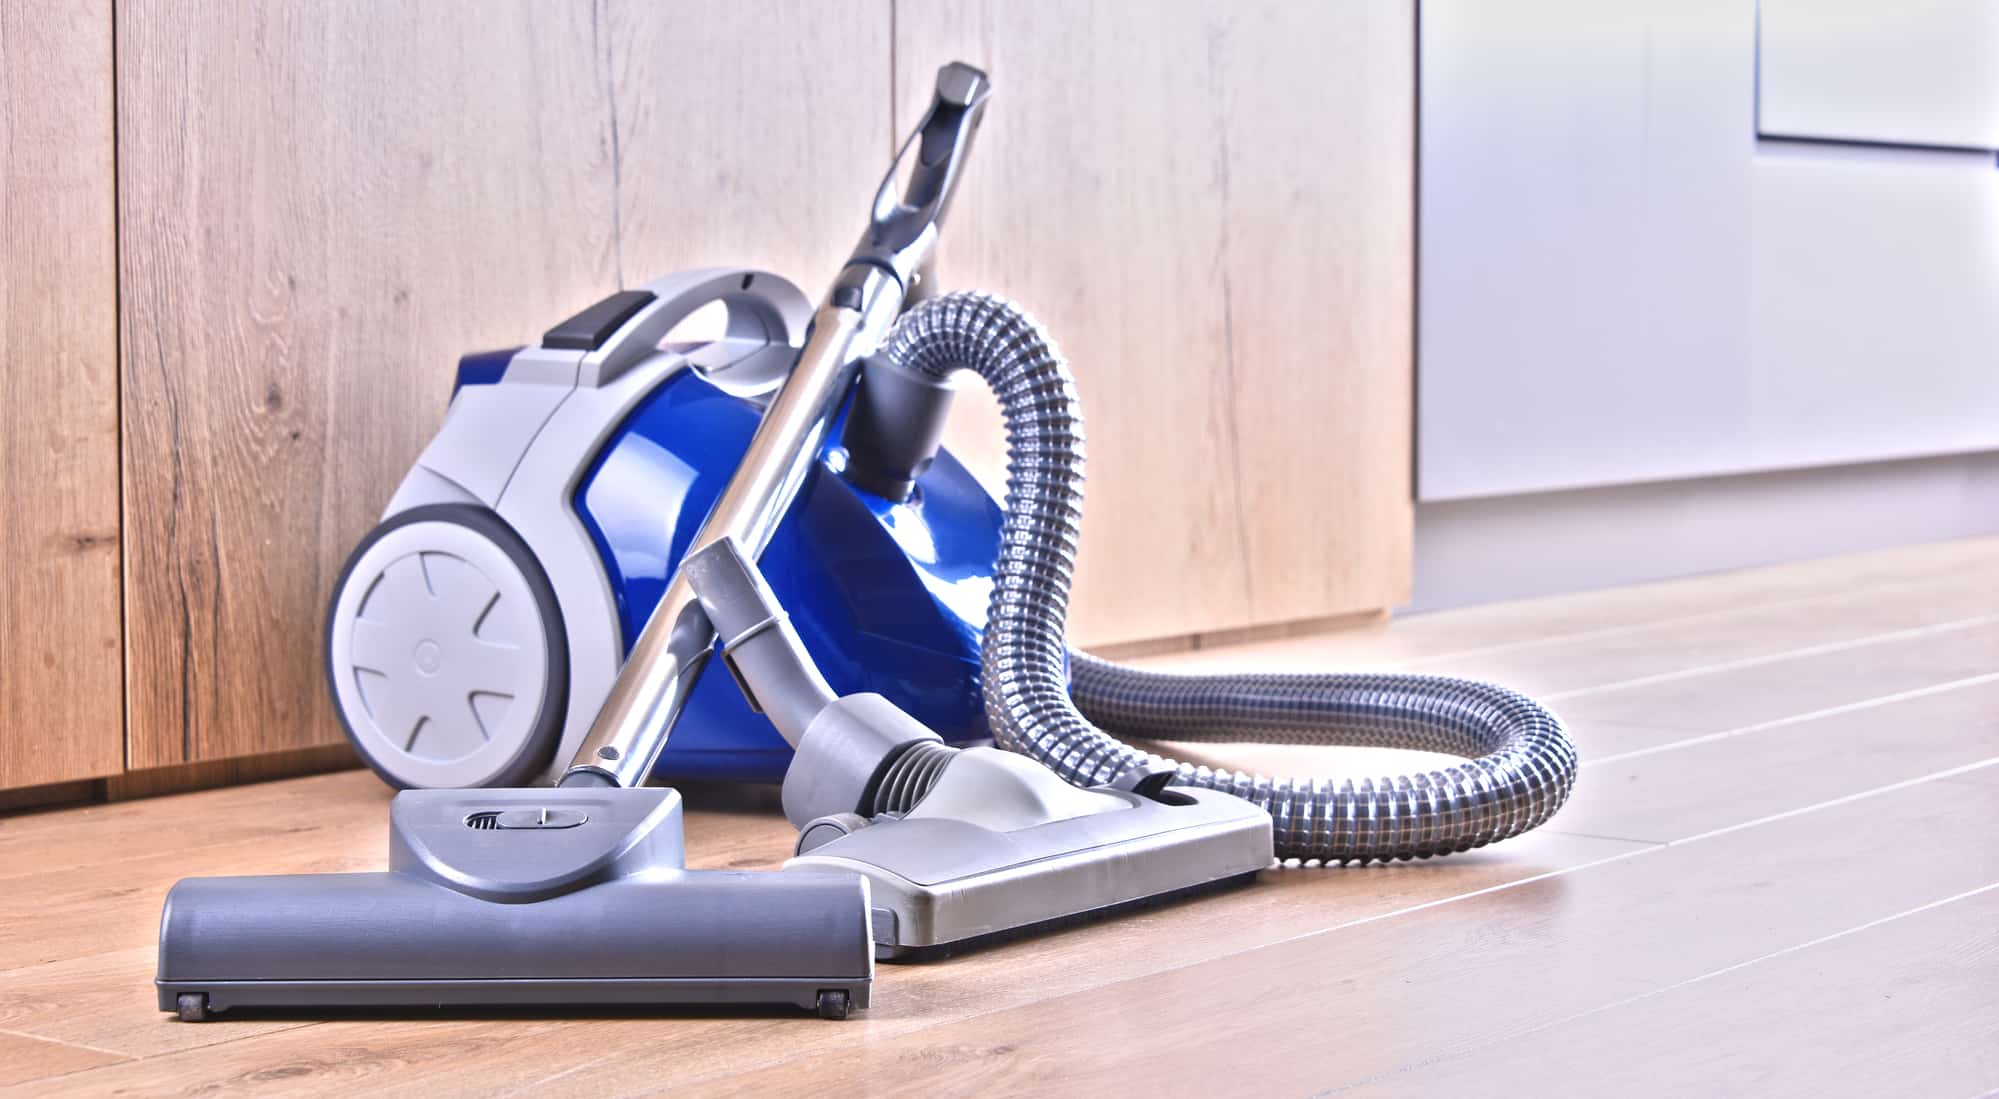 10 Best Canister Vacuums In Canada 2021 Review & Guide